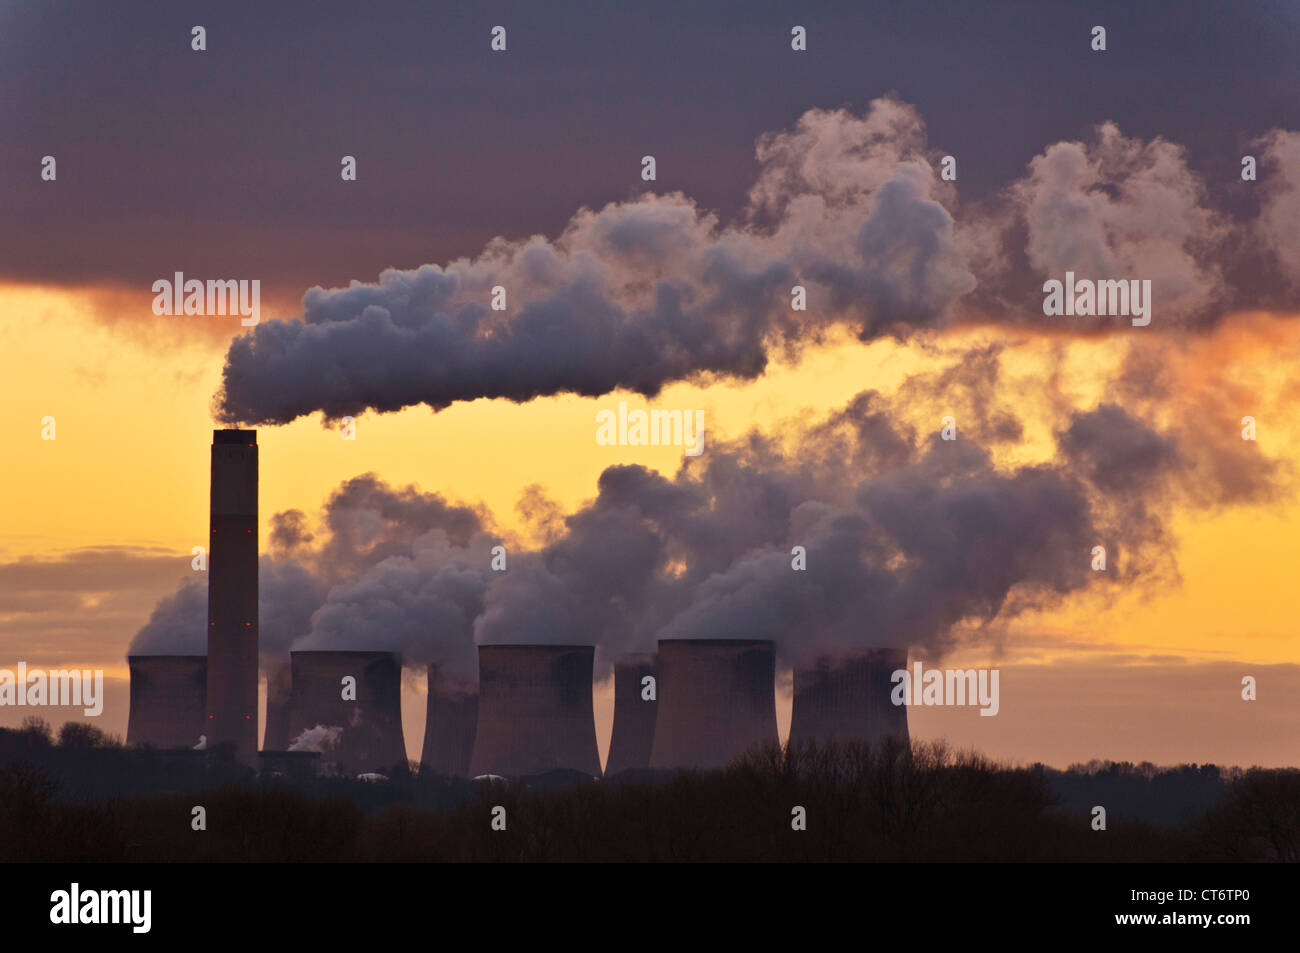 Coal power station co2 emissions and Air pollution UK from the Cooling towers of Ratcliffe on Soar coal fired power station Nottinghamshire England UK Stock Photo